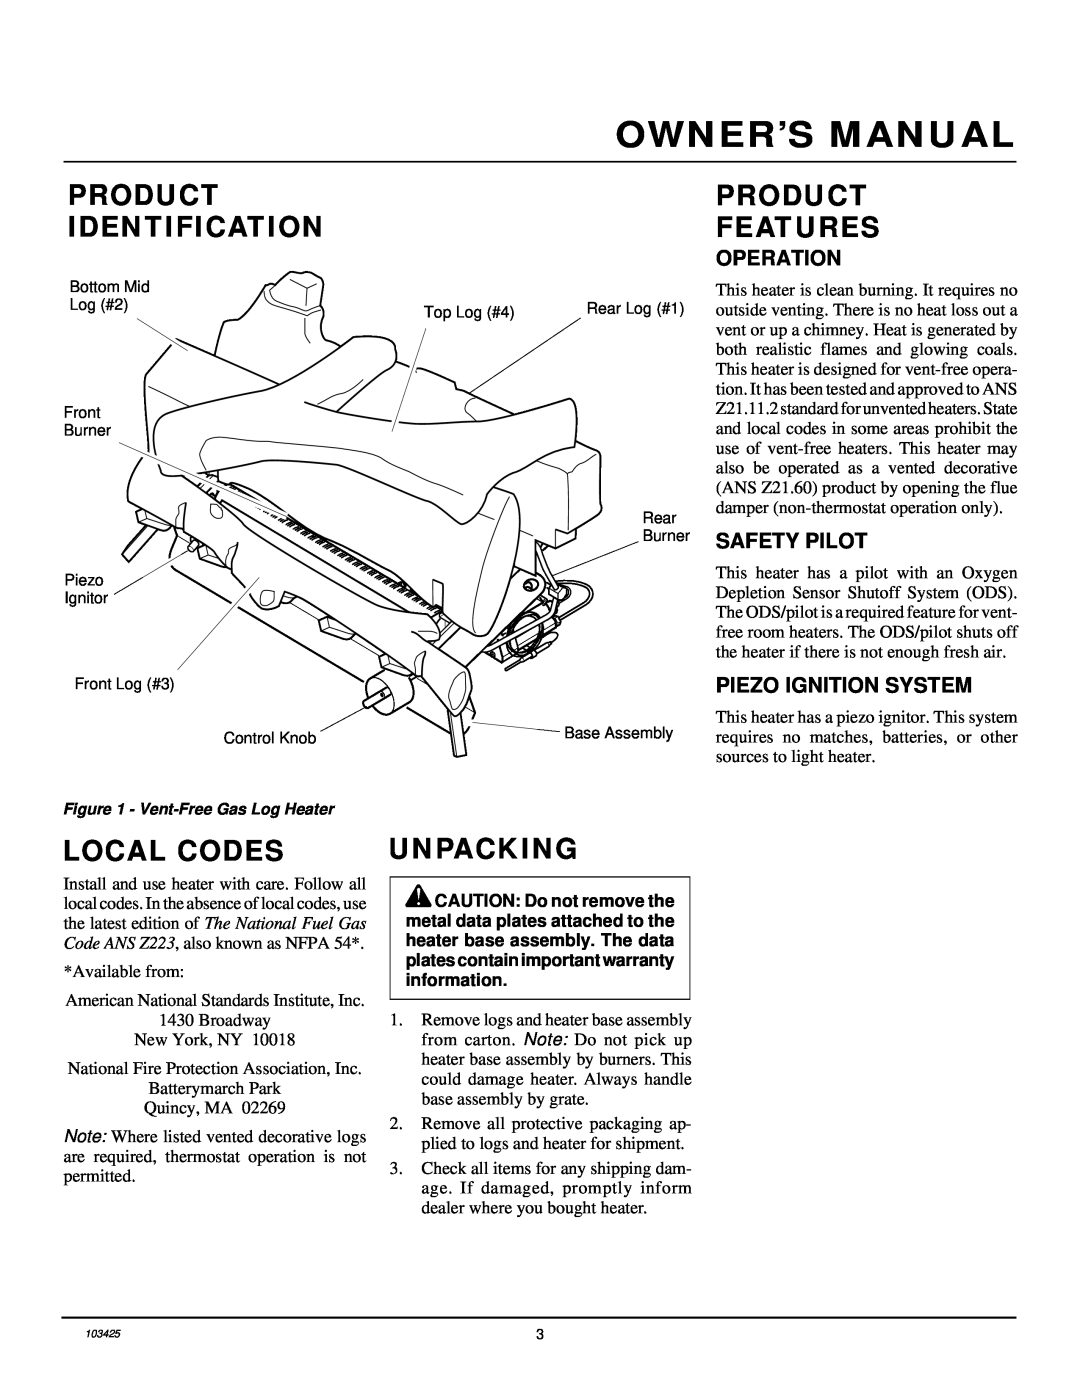 Desa Tech CGG2618P, CGG3630P, CGG3324PT Owner’S Manual, Product Identification, Product Features, Local Codes, Unpacking 